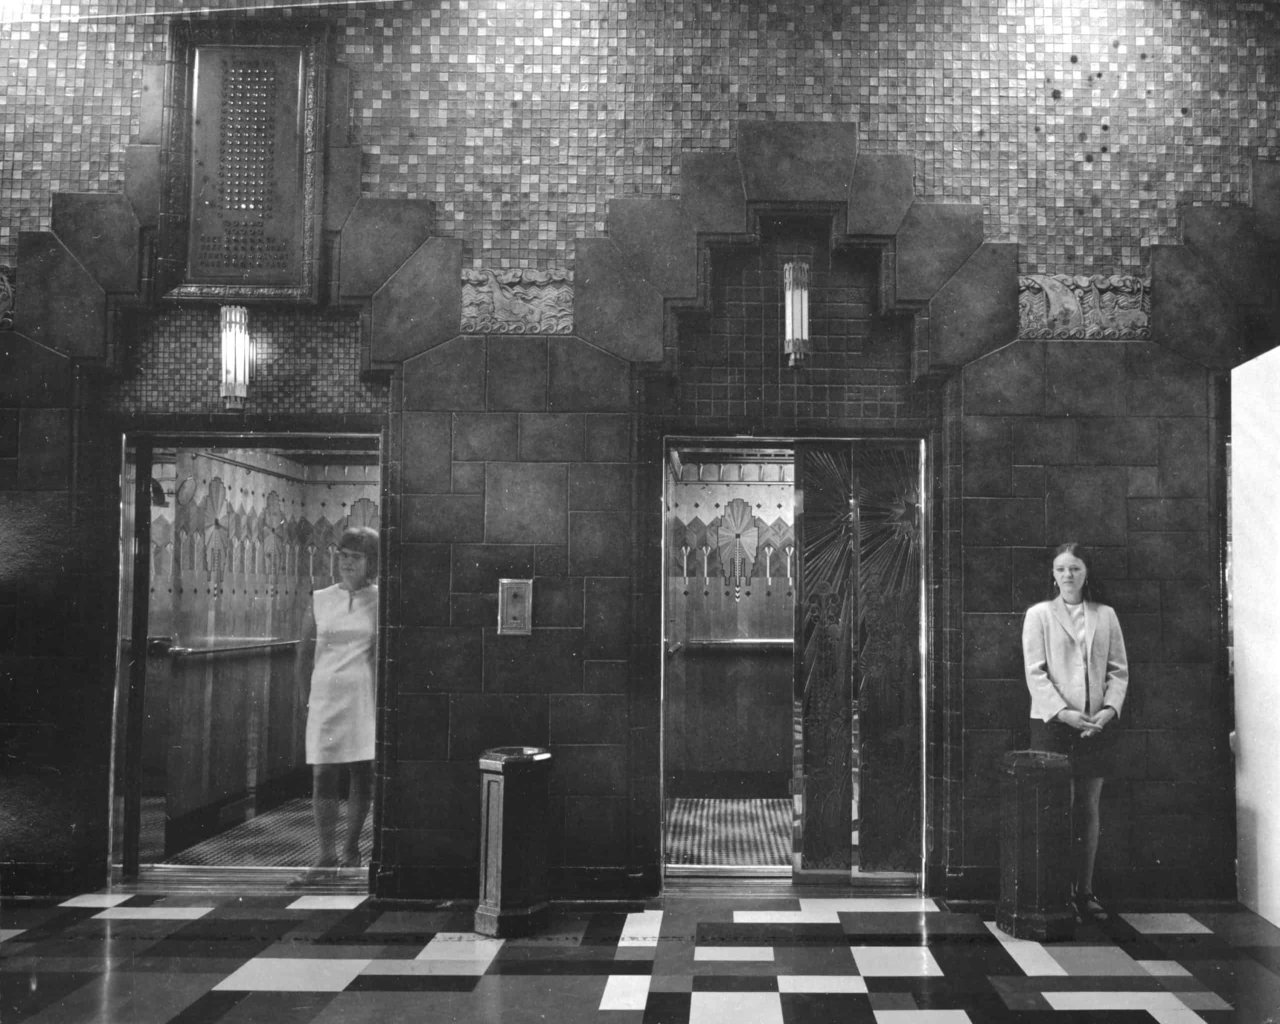 Interior lobby and elevators of the Marine Building, 1972. Philip Timms via City of Vancouver Archives, CVA 677-915 